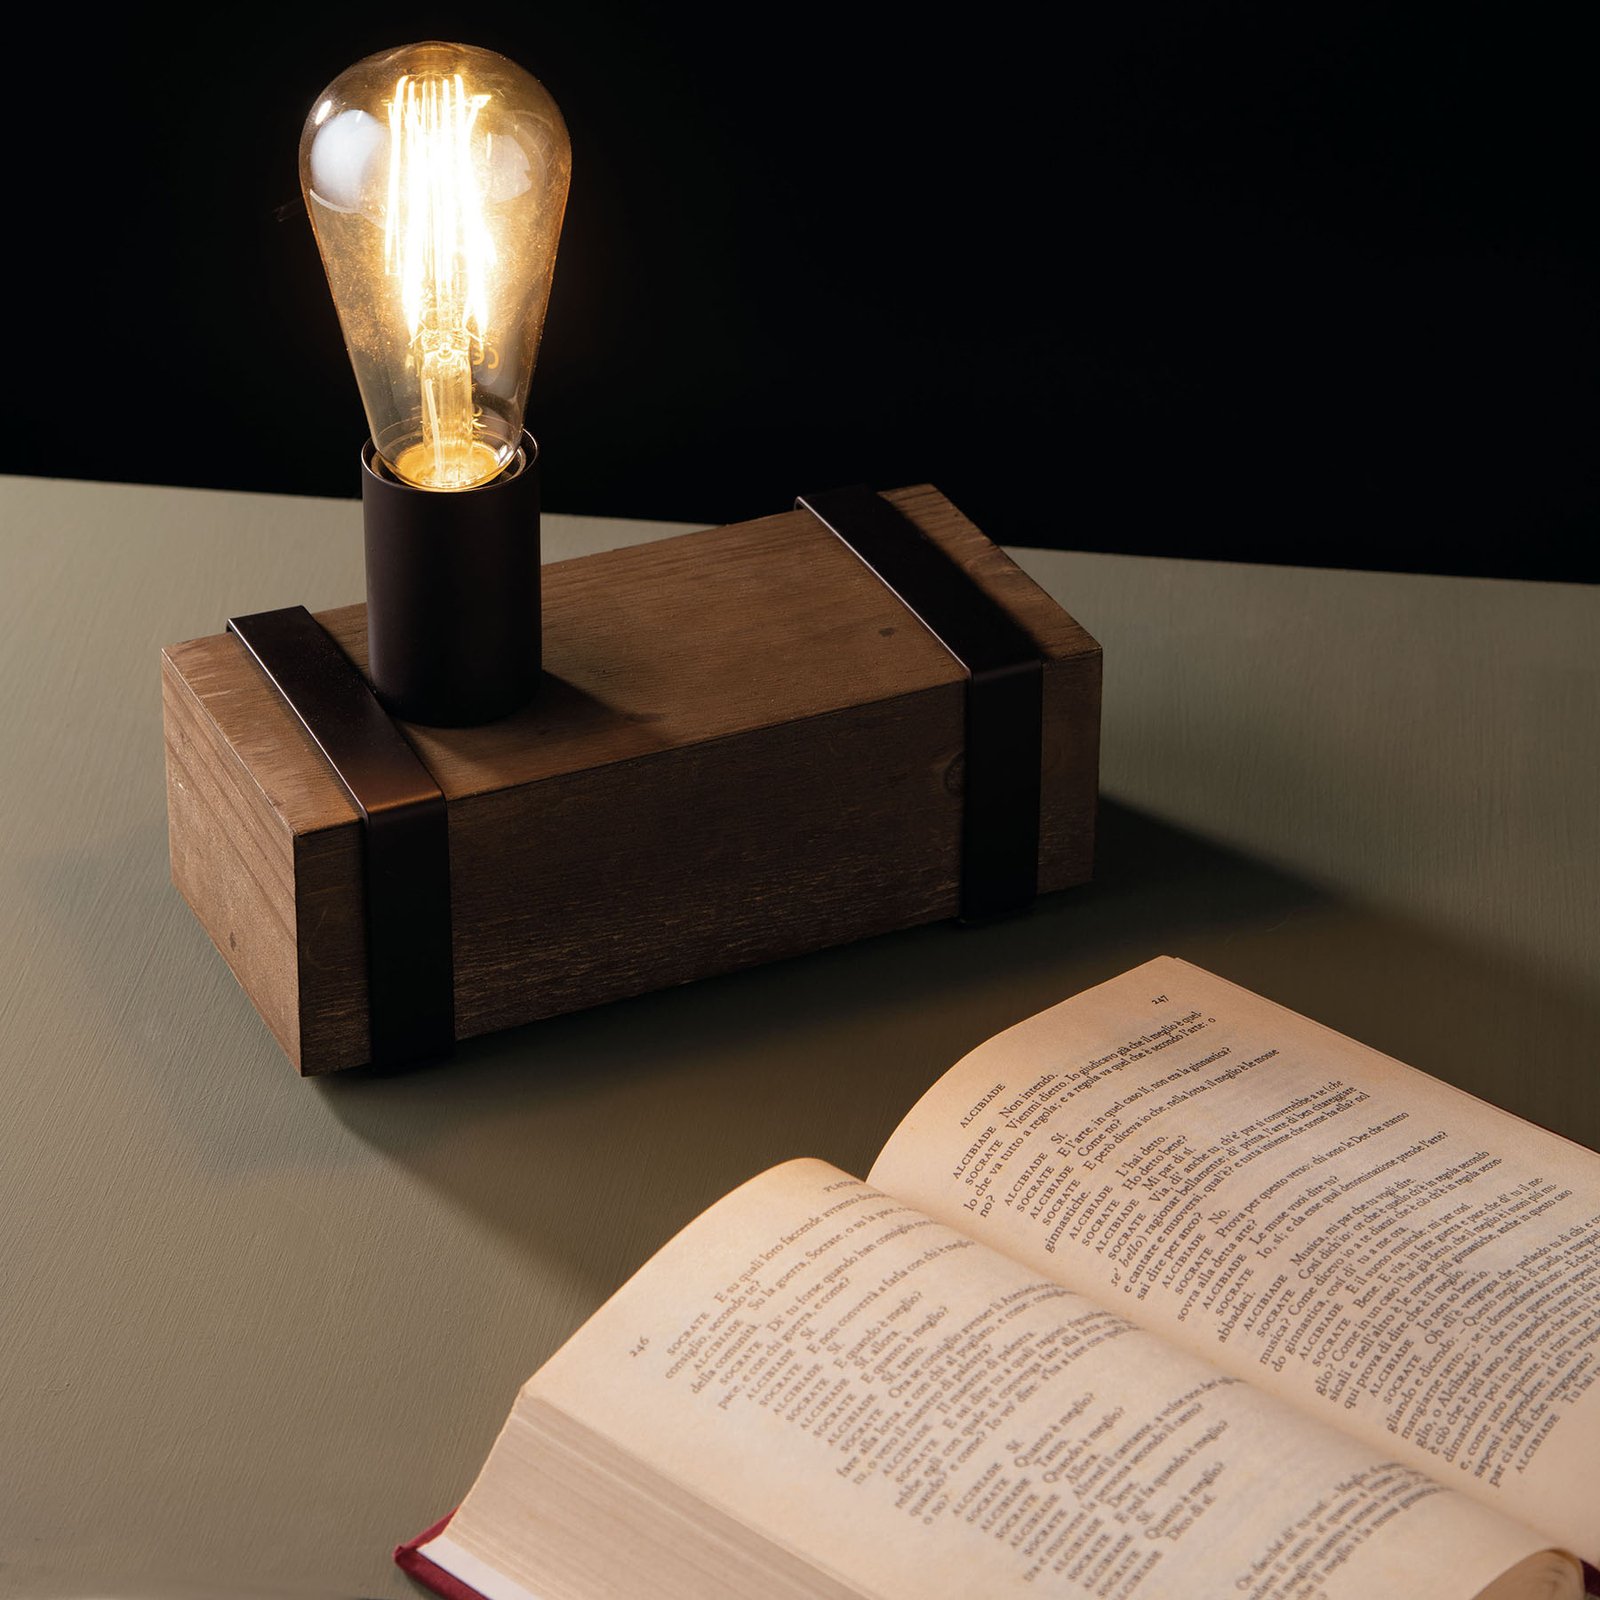 Texas table lamp made of antique wood, 1-bulb